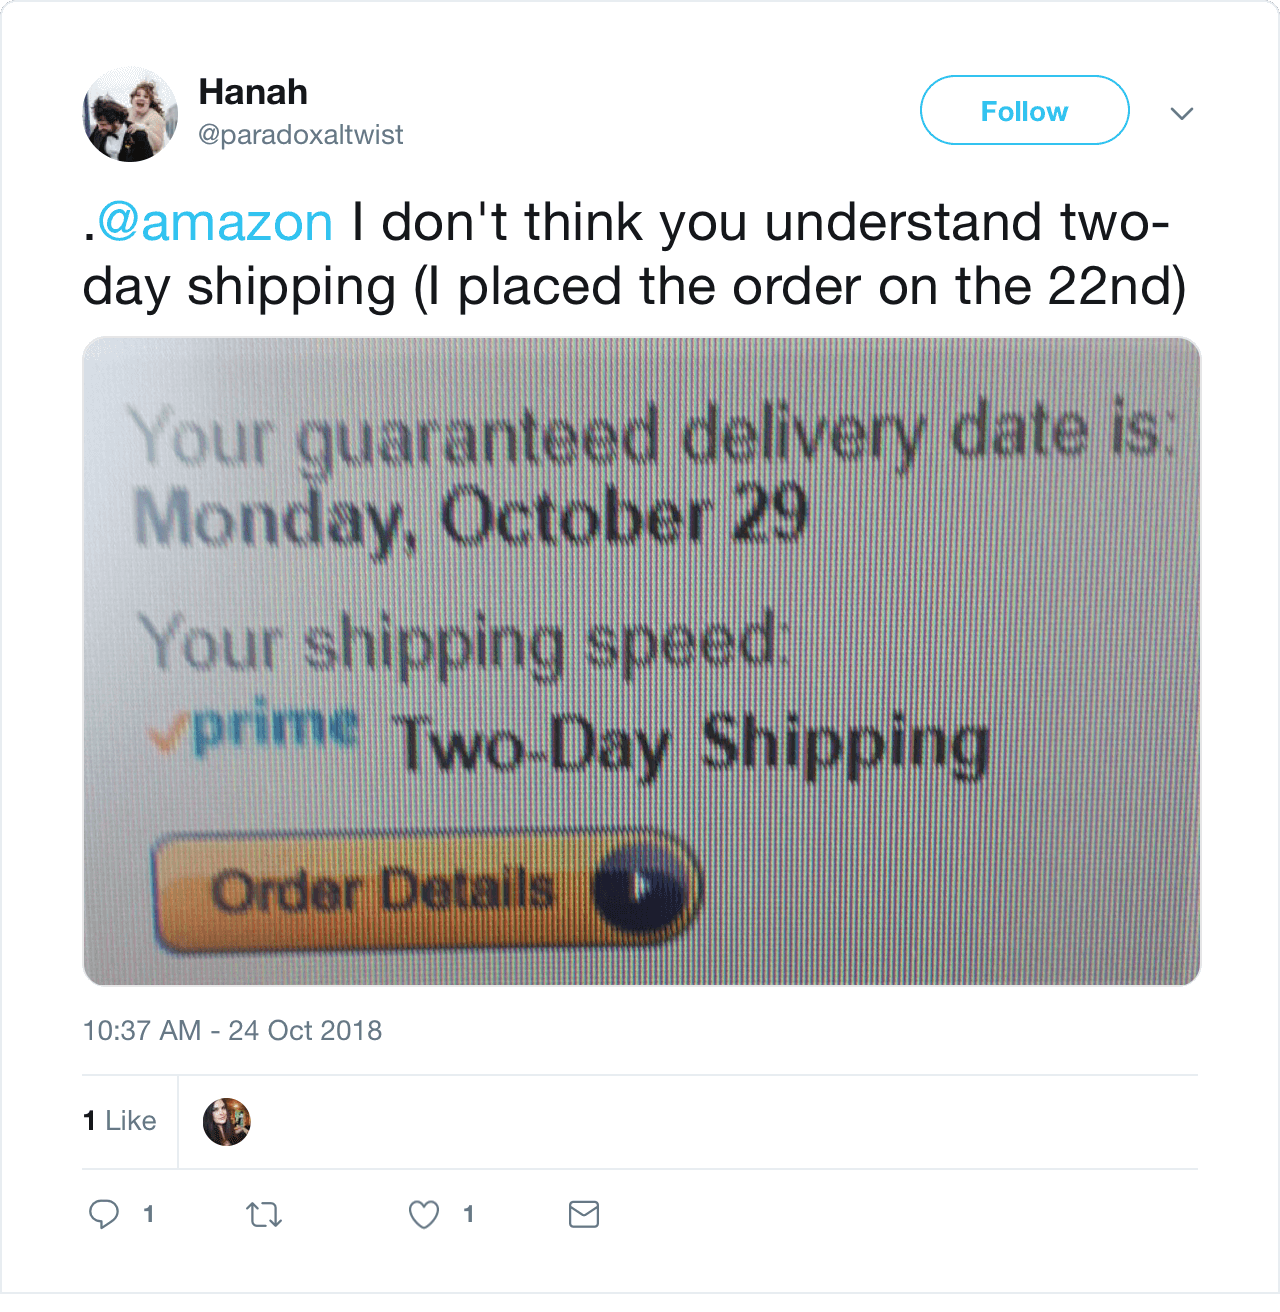 Tweet about Amazon Prime two-day shipping